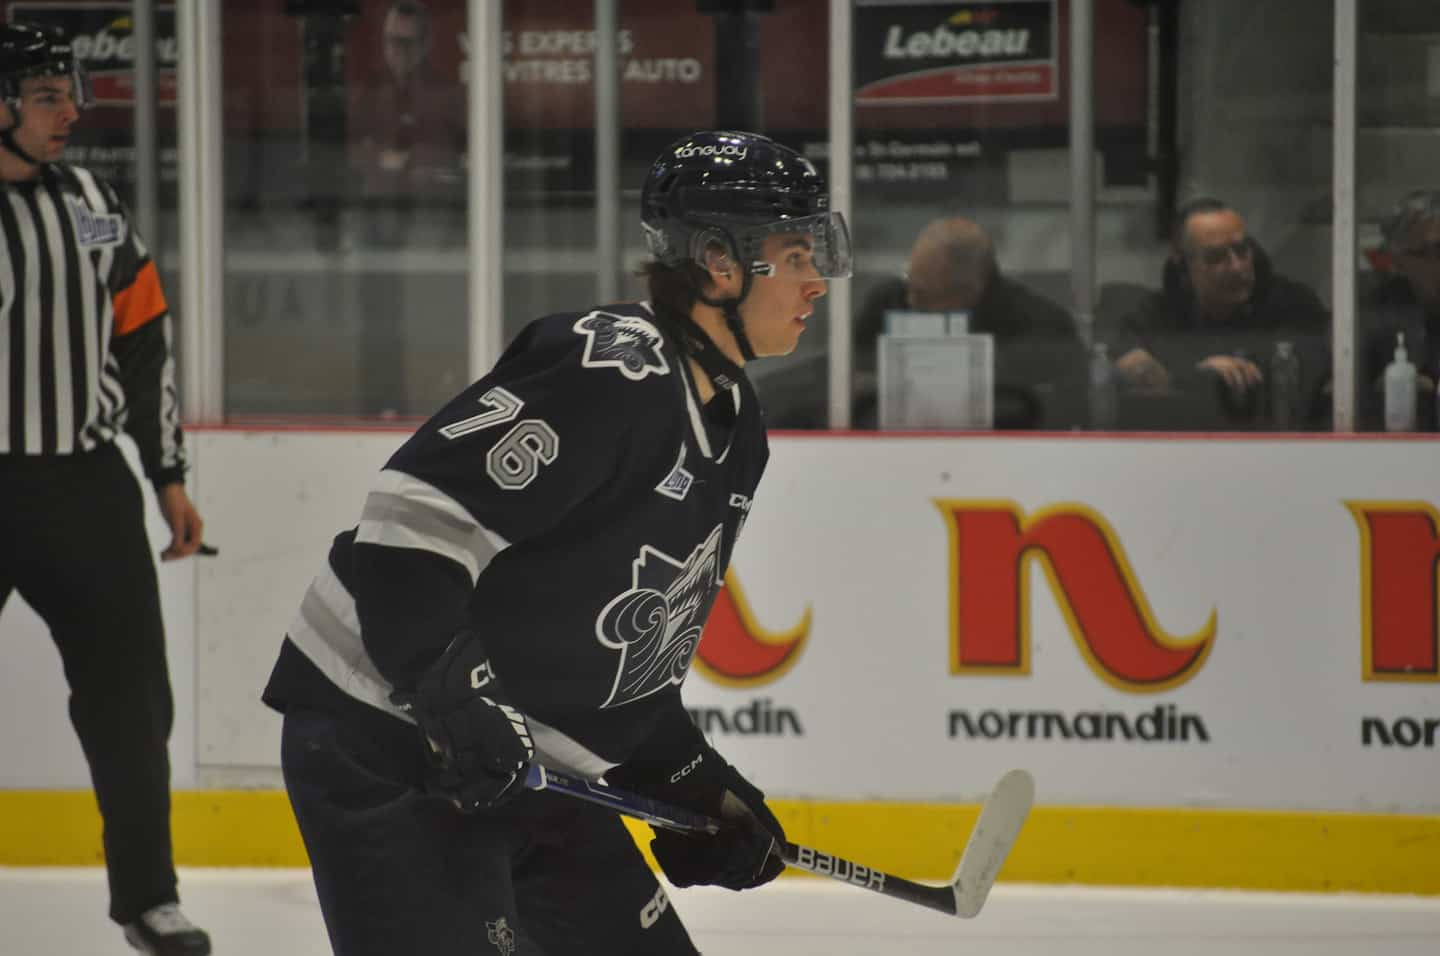 Rimouski Oceanic: At least two first-round picks for Brunet